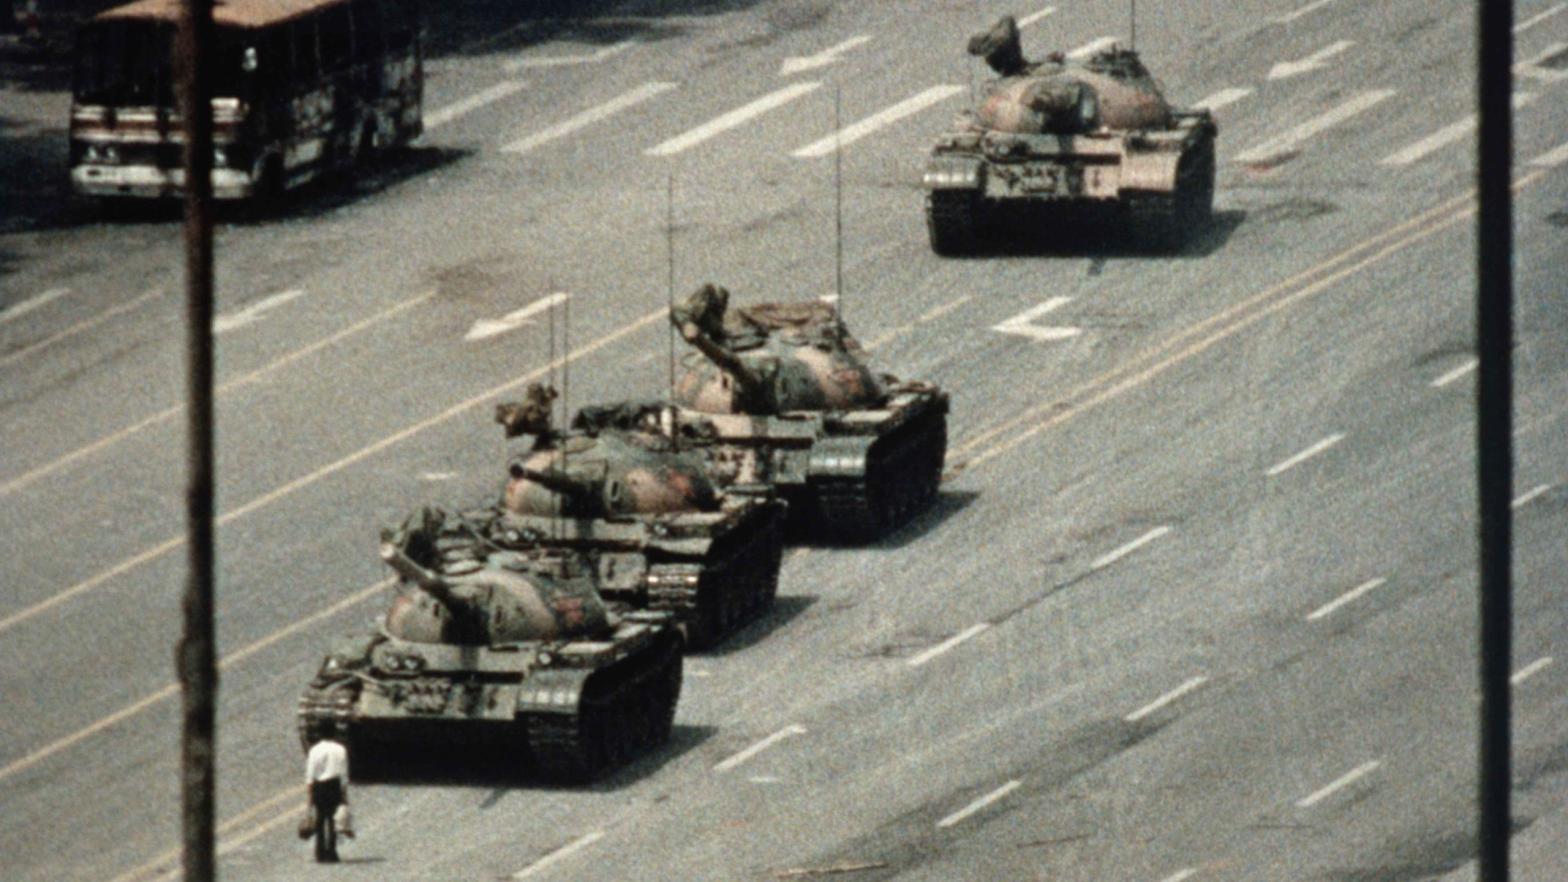 Photo: The Tiananmen Square protests in 1989 saw hundreds, if not thousands of students killed by the Chinese military.